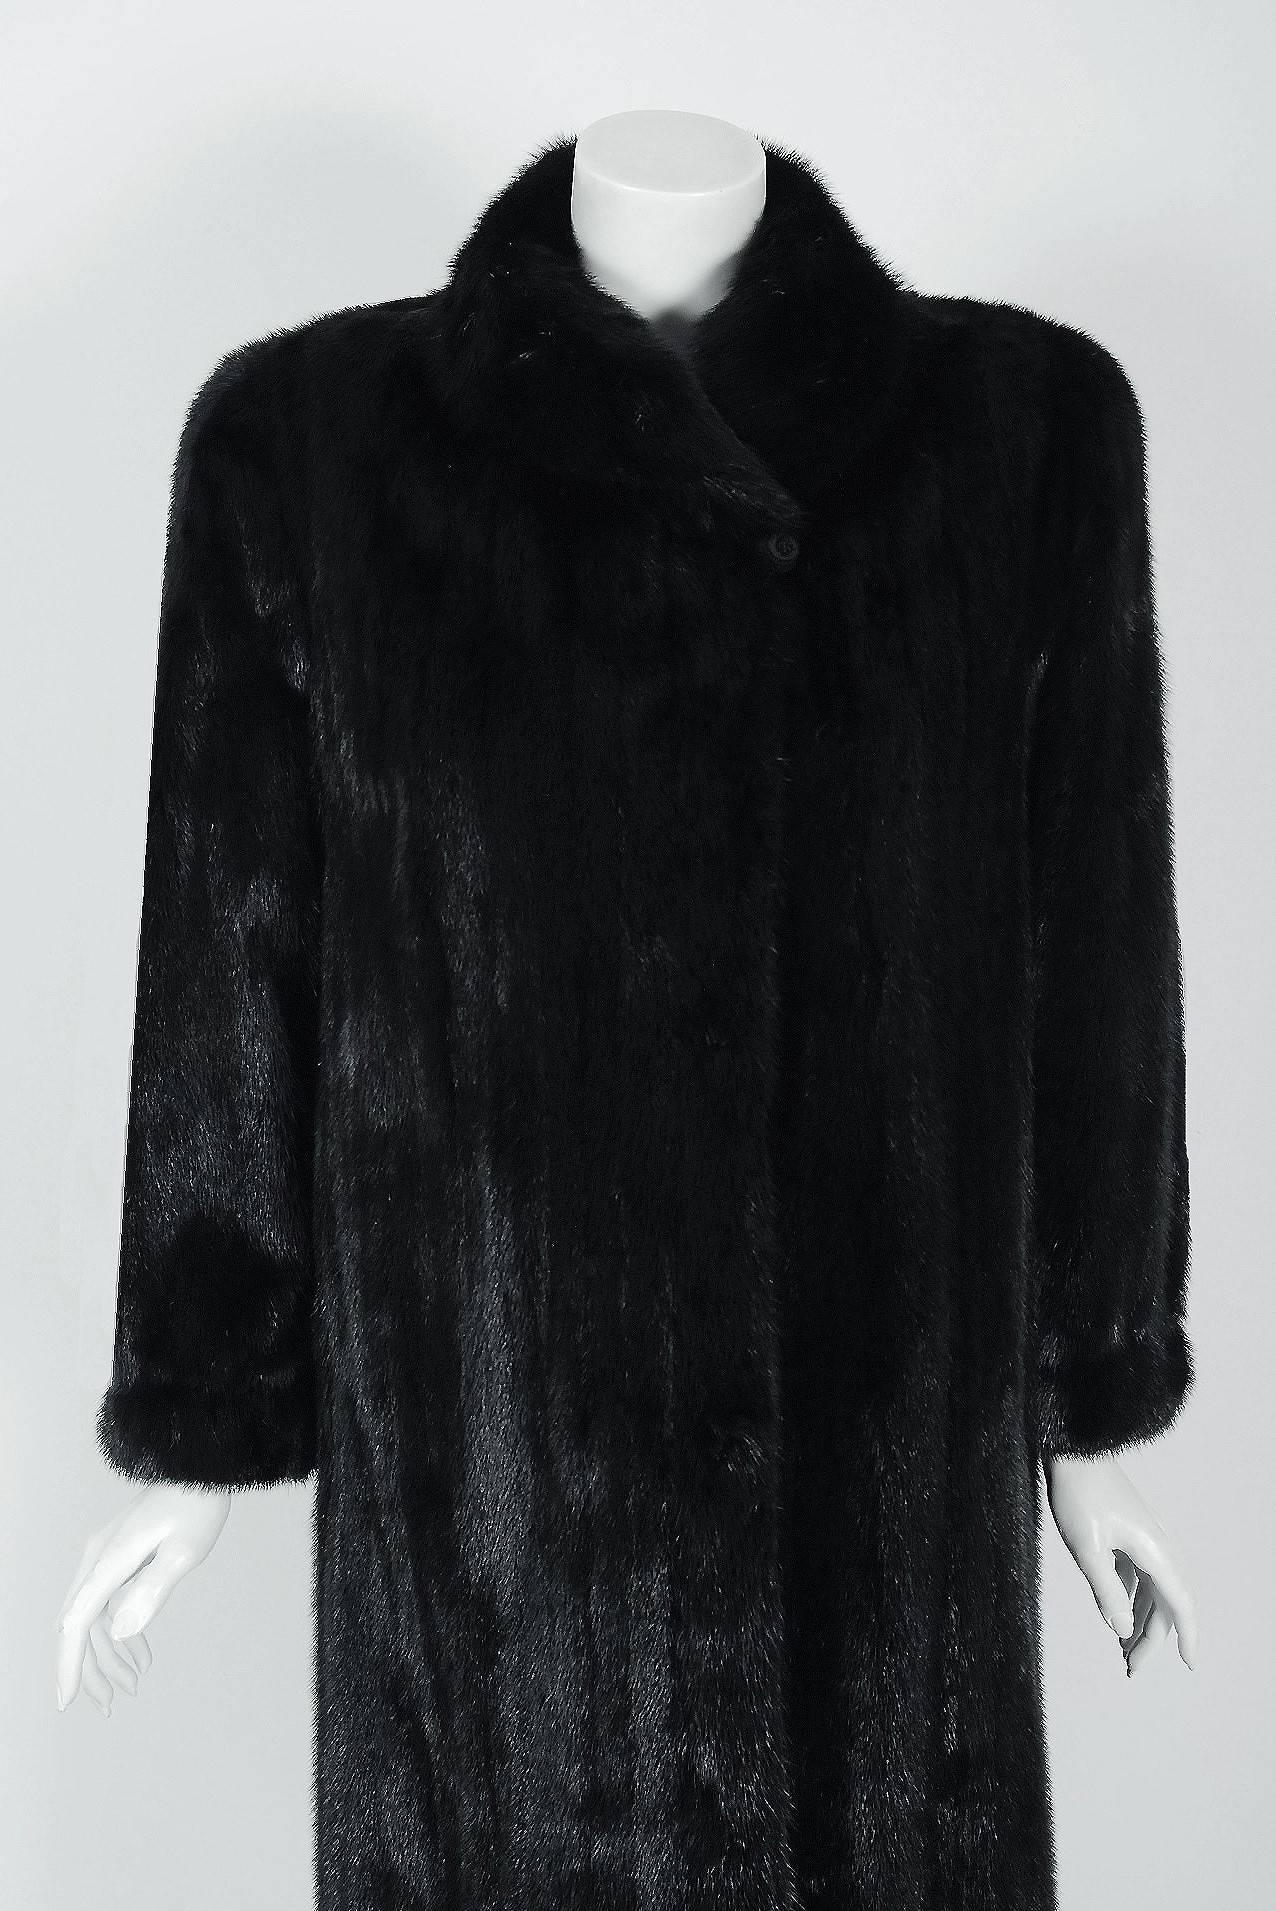 Breathtaking Christian Dior Couture genuine Black Diamond mink coat which originally retailed for over $20,000. The House of Dior has been an enduring icon of Haute Couture. When the talented Gianfranco Ferré took over as head designer in 1989, he